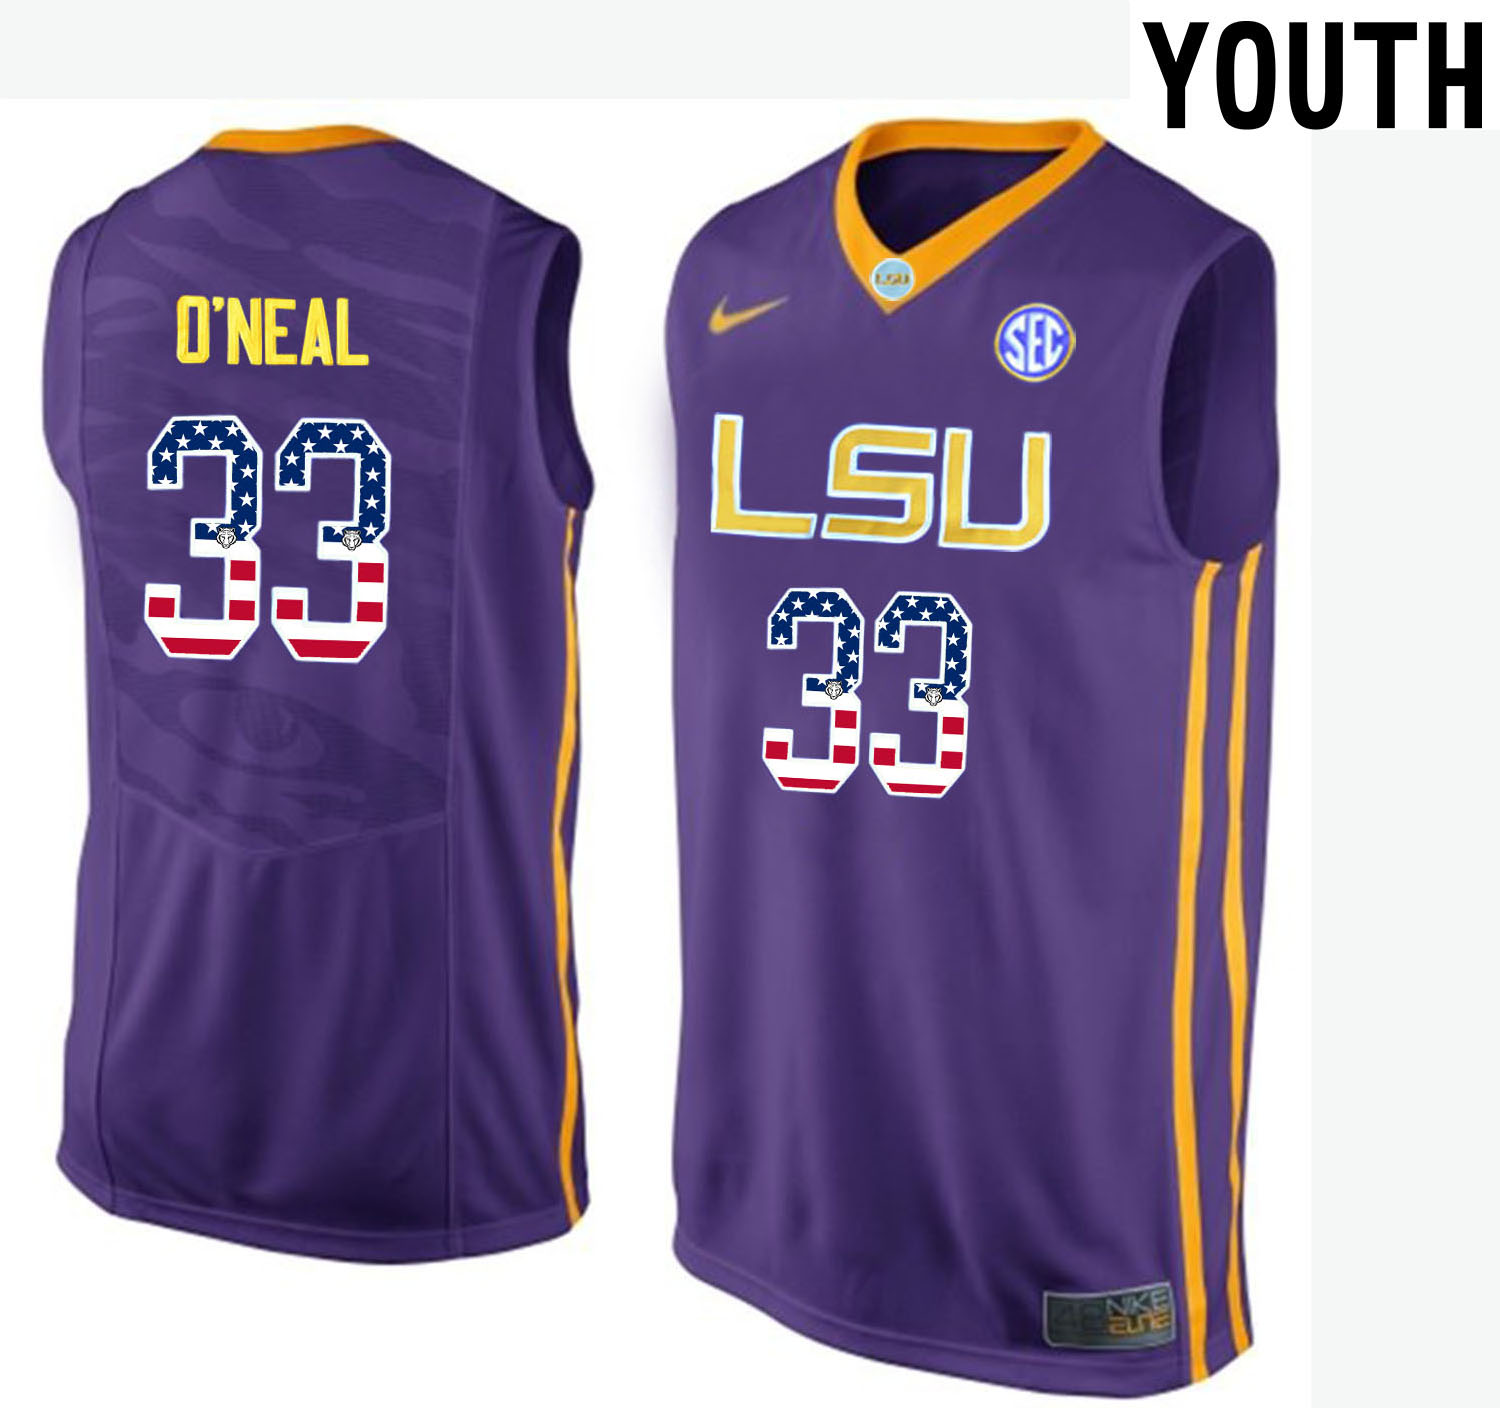 LSU Tigers 33 Shaquille O'Neal Purple Youth College Basketball Jersey